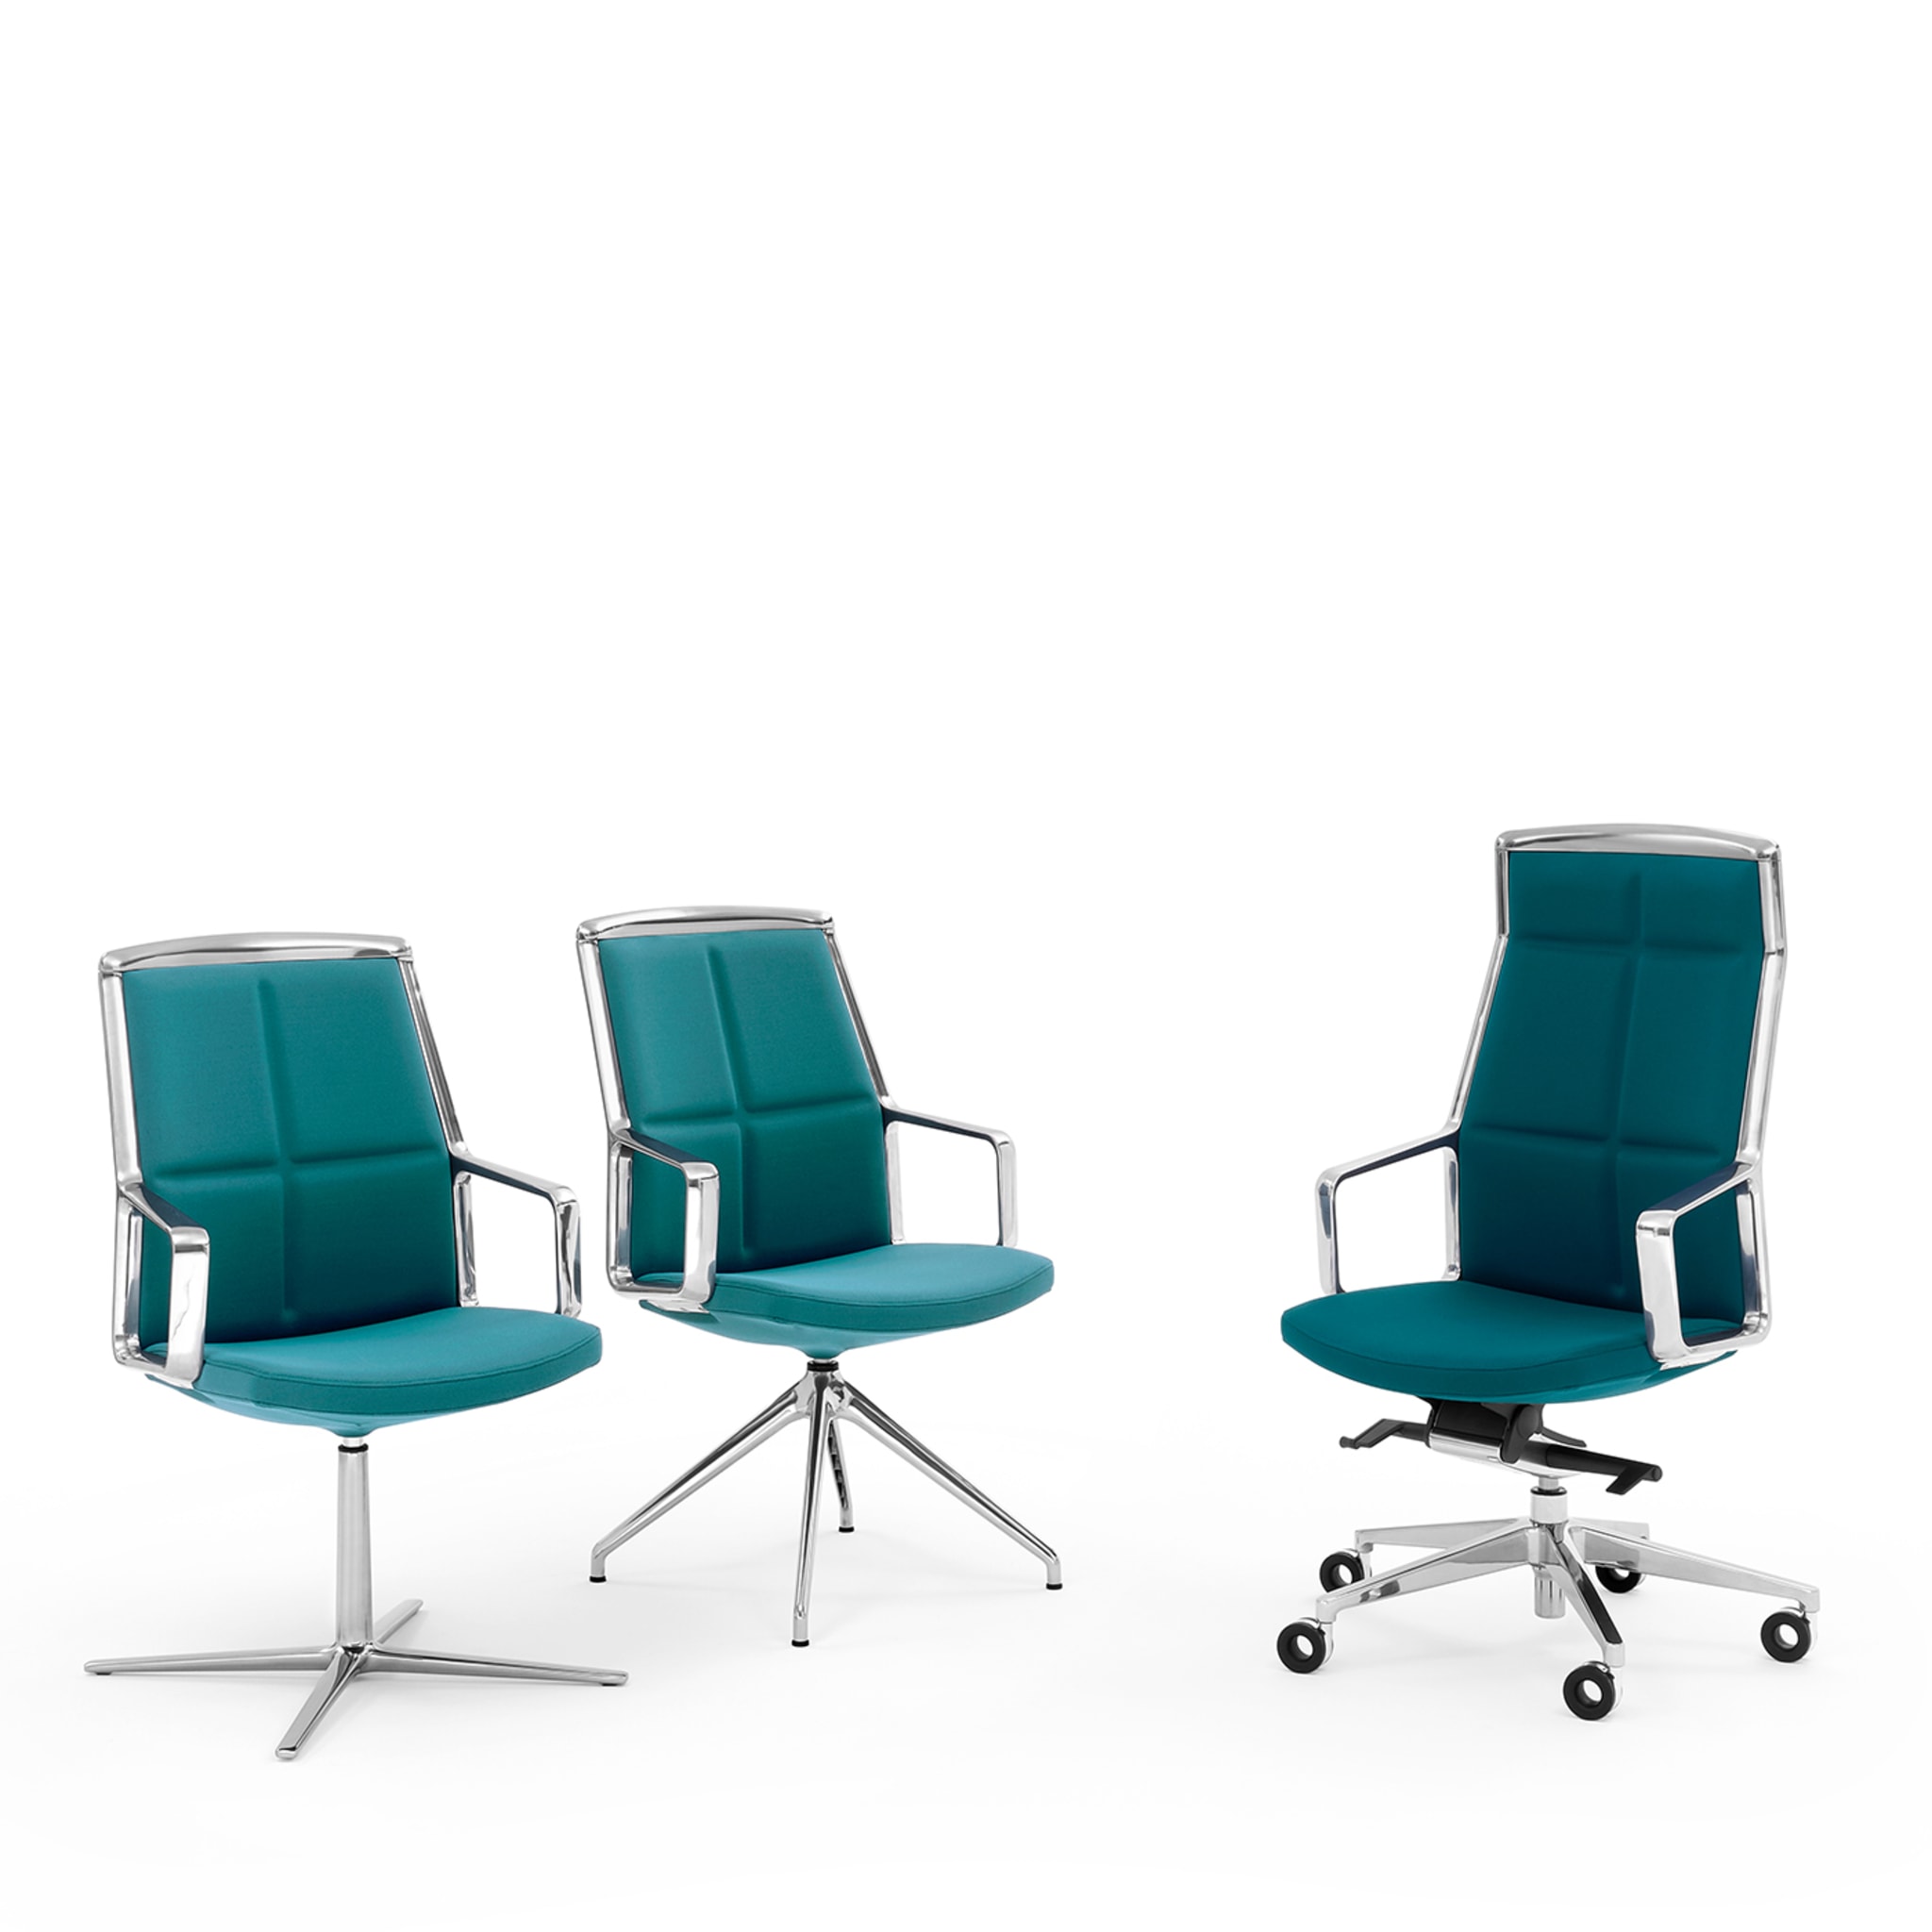 ADELE BLUE-GREEN EXECUTIVE CHAIR by ORLANDINIDESIGN - Alternative view 1